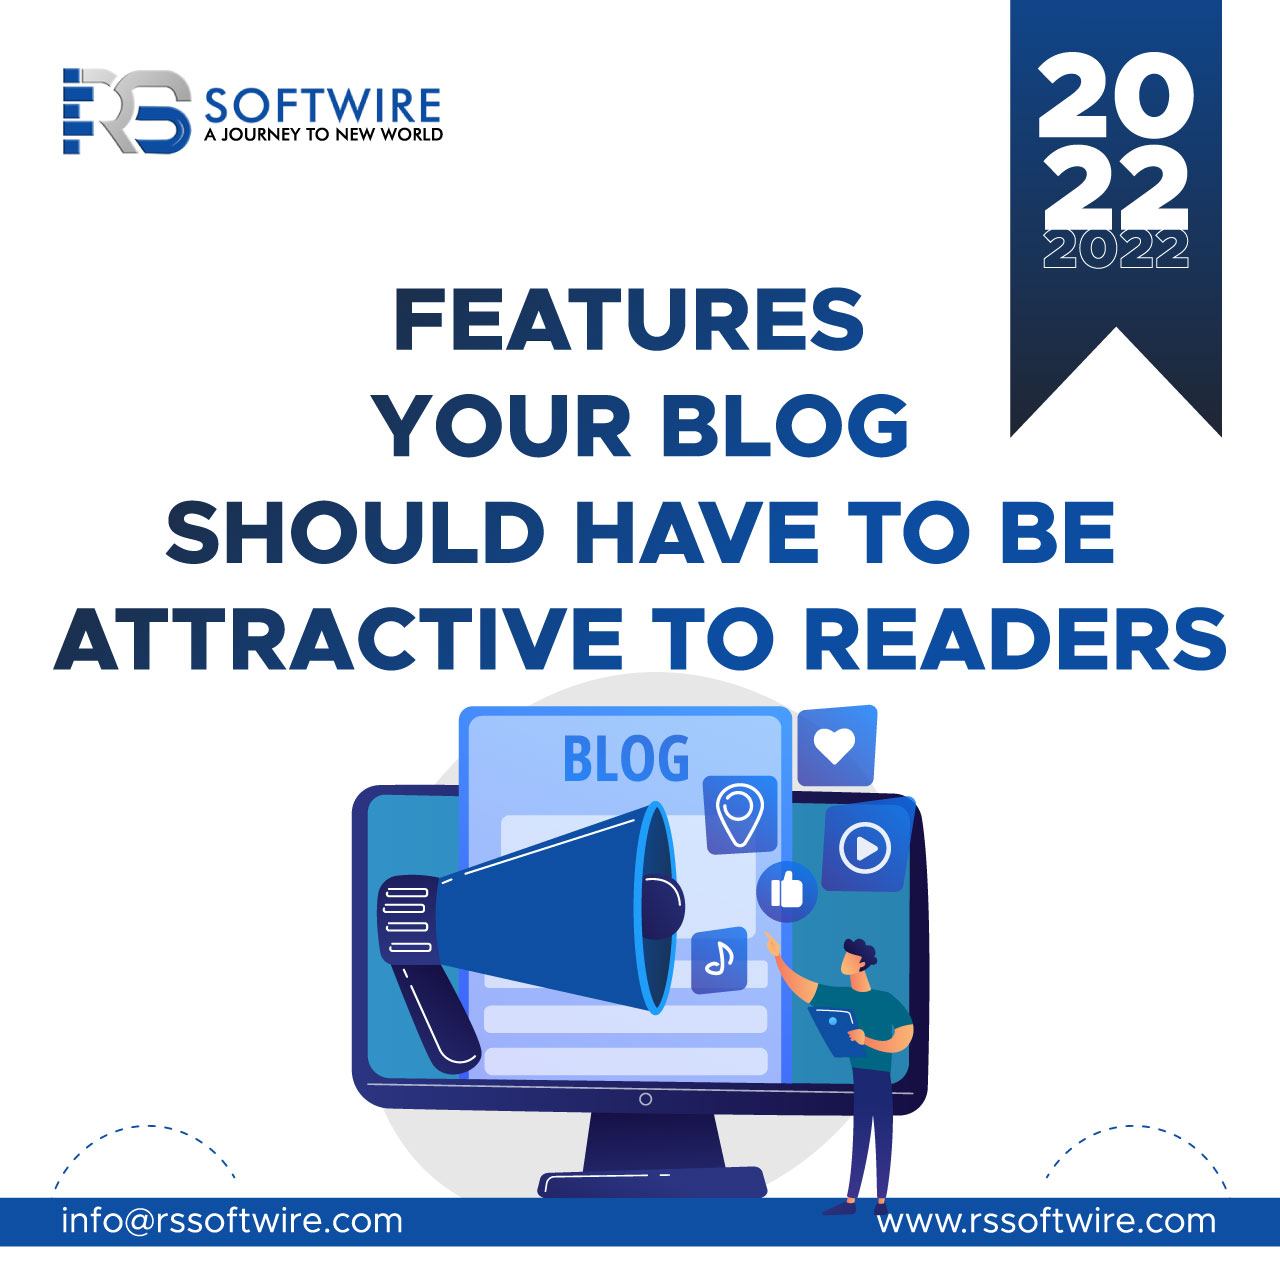 Features Your Blog Should Have To Be Attractive to Readers